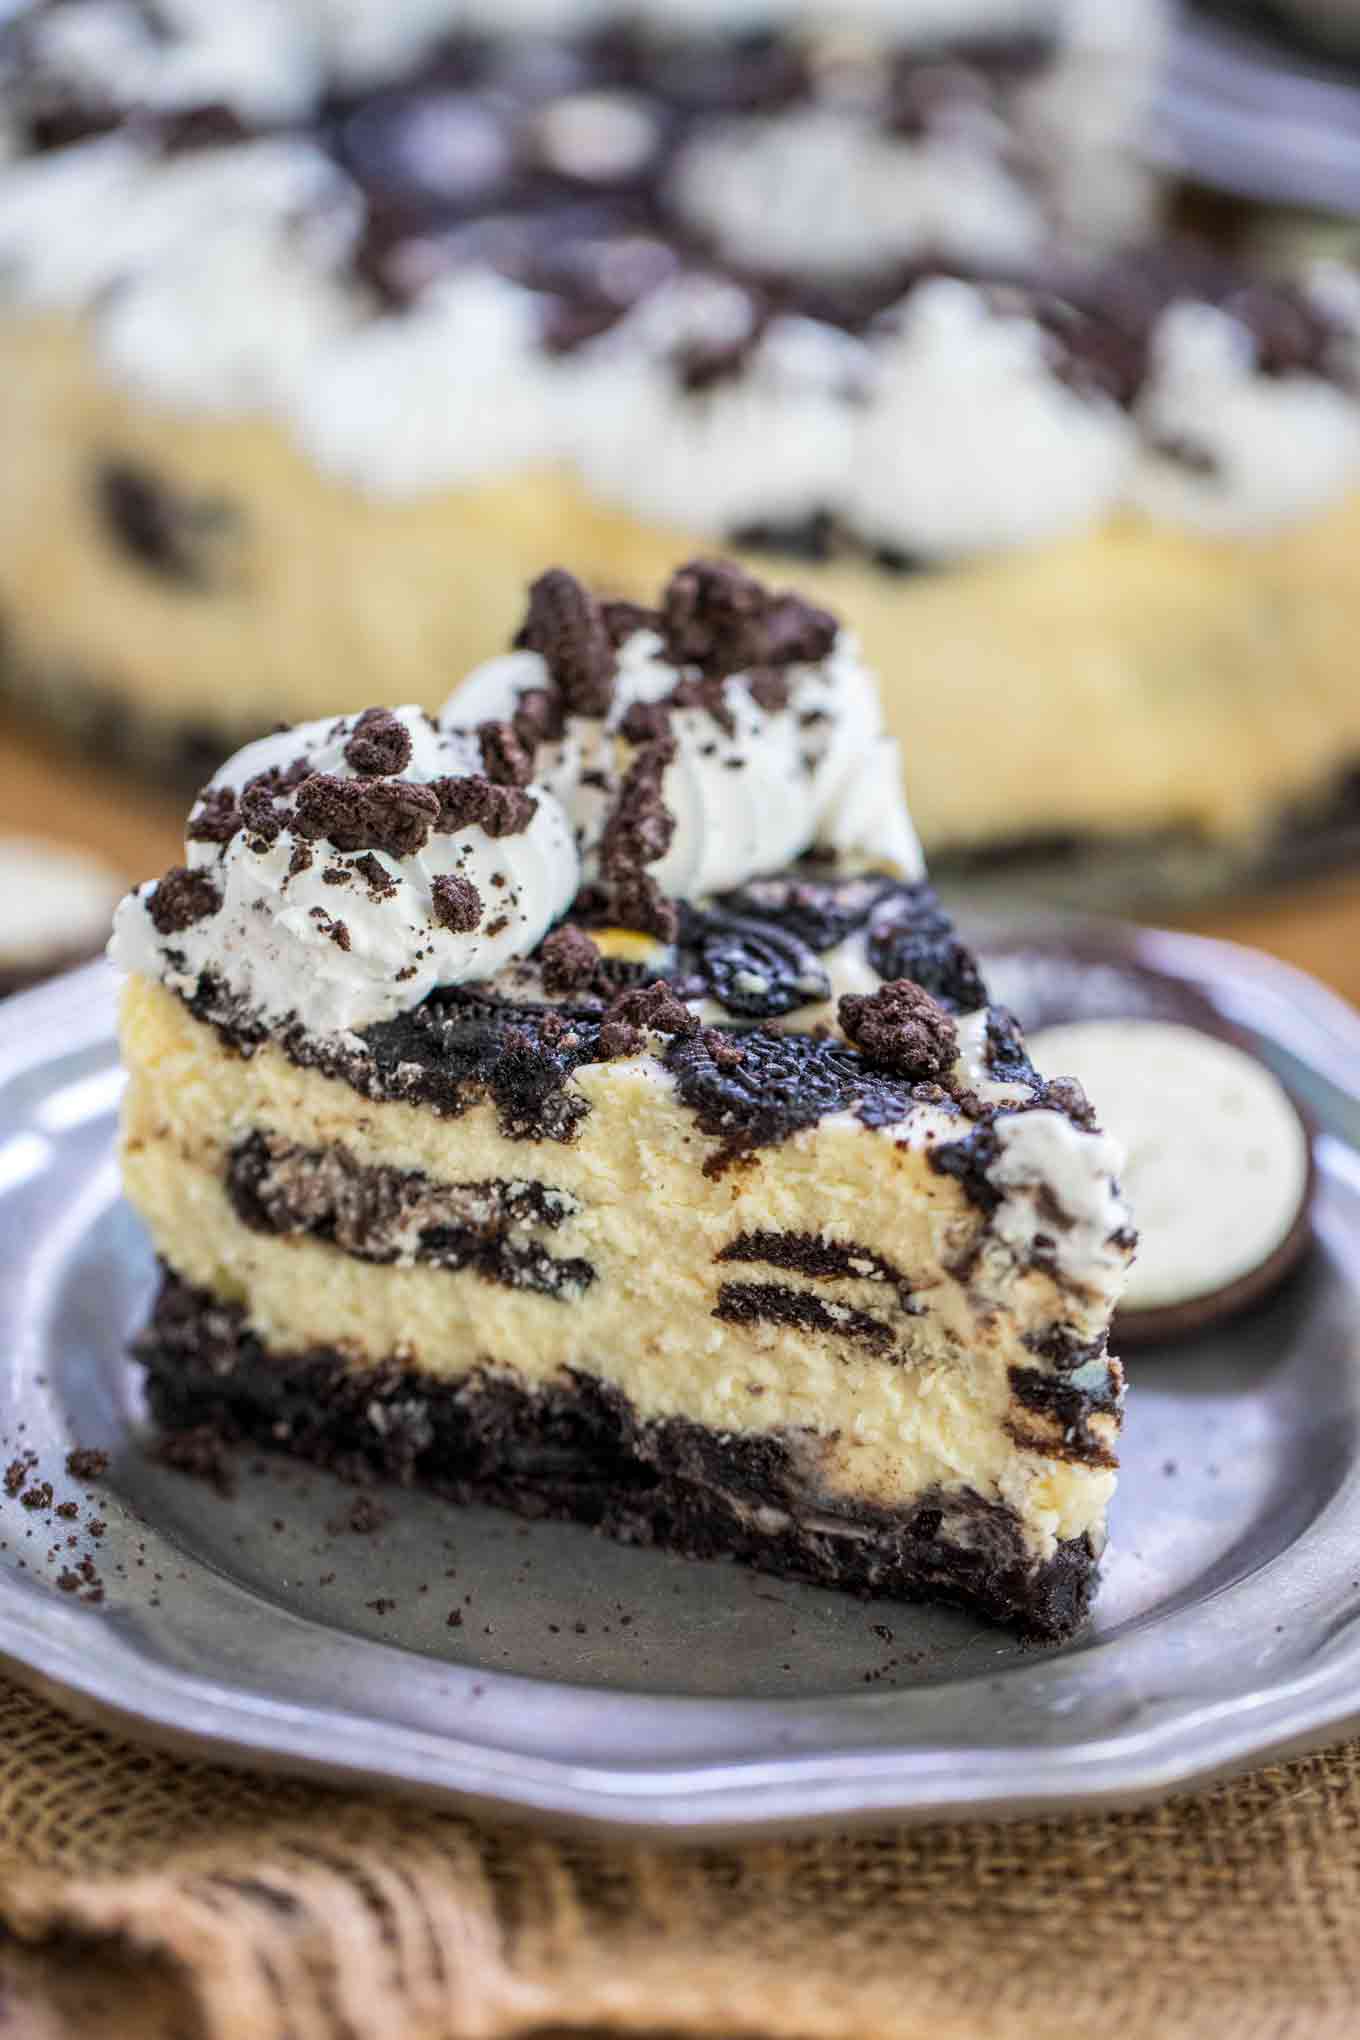 Best Oreo Cheesecake [Video] - Sweet and Savory Meals